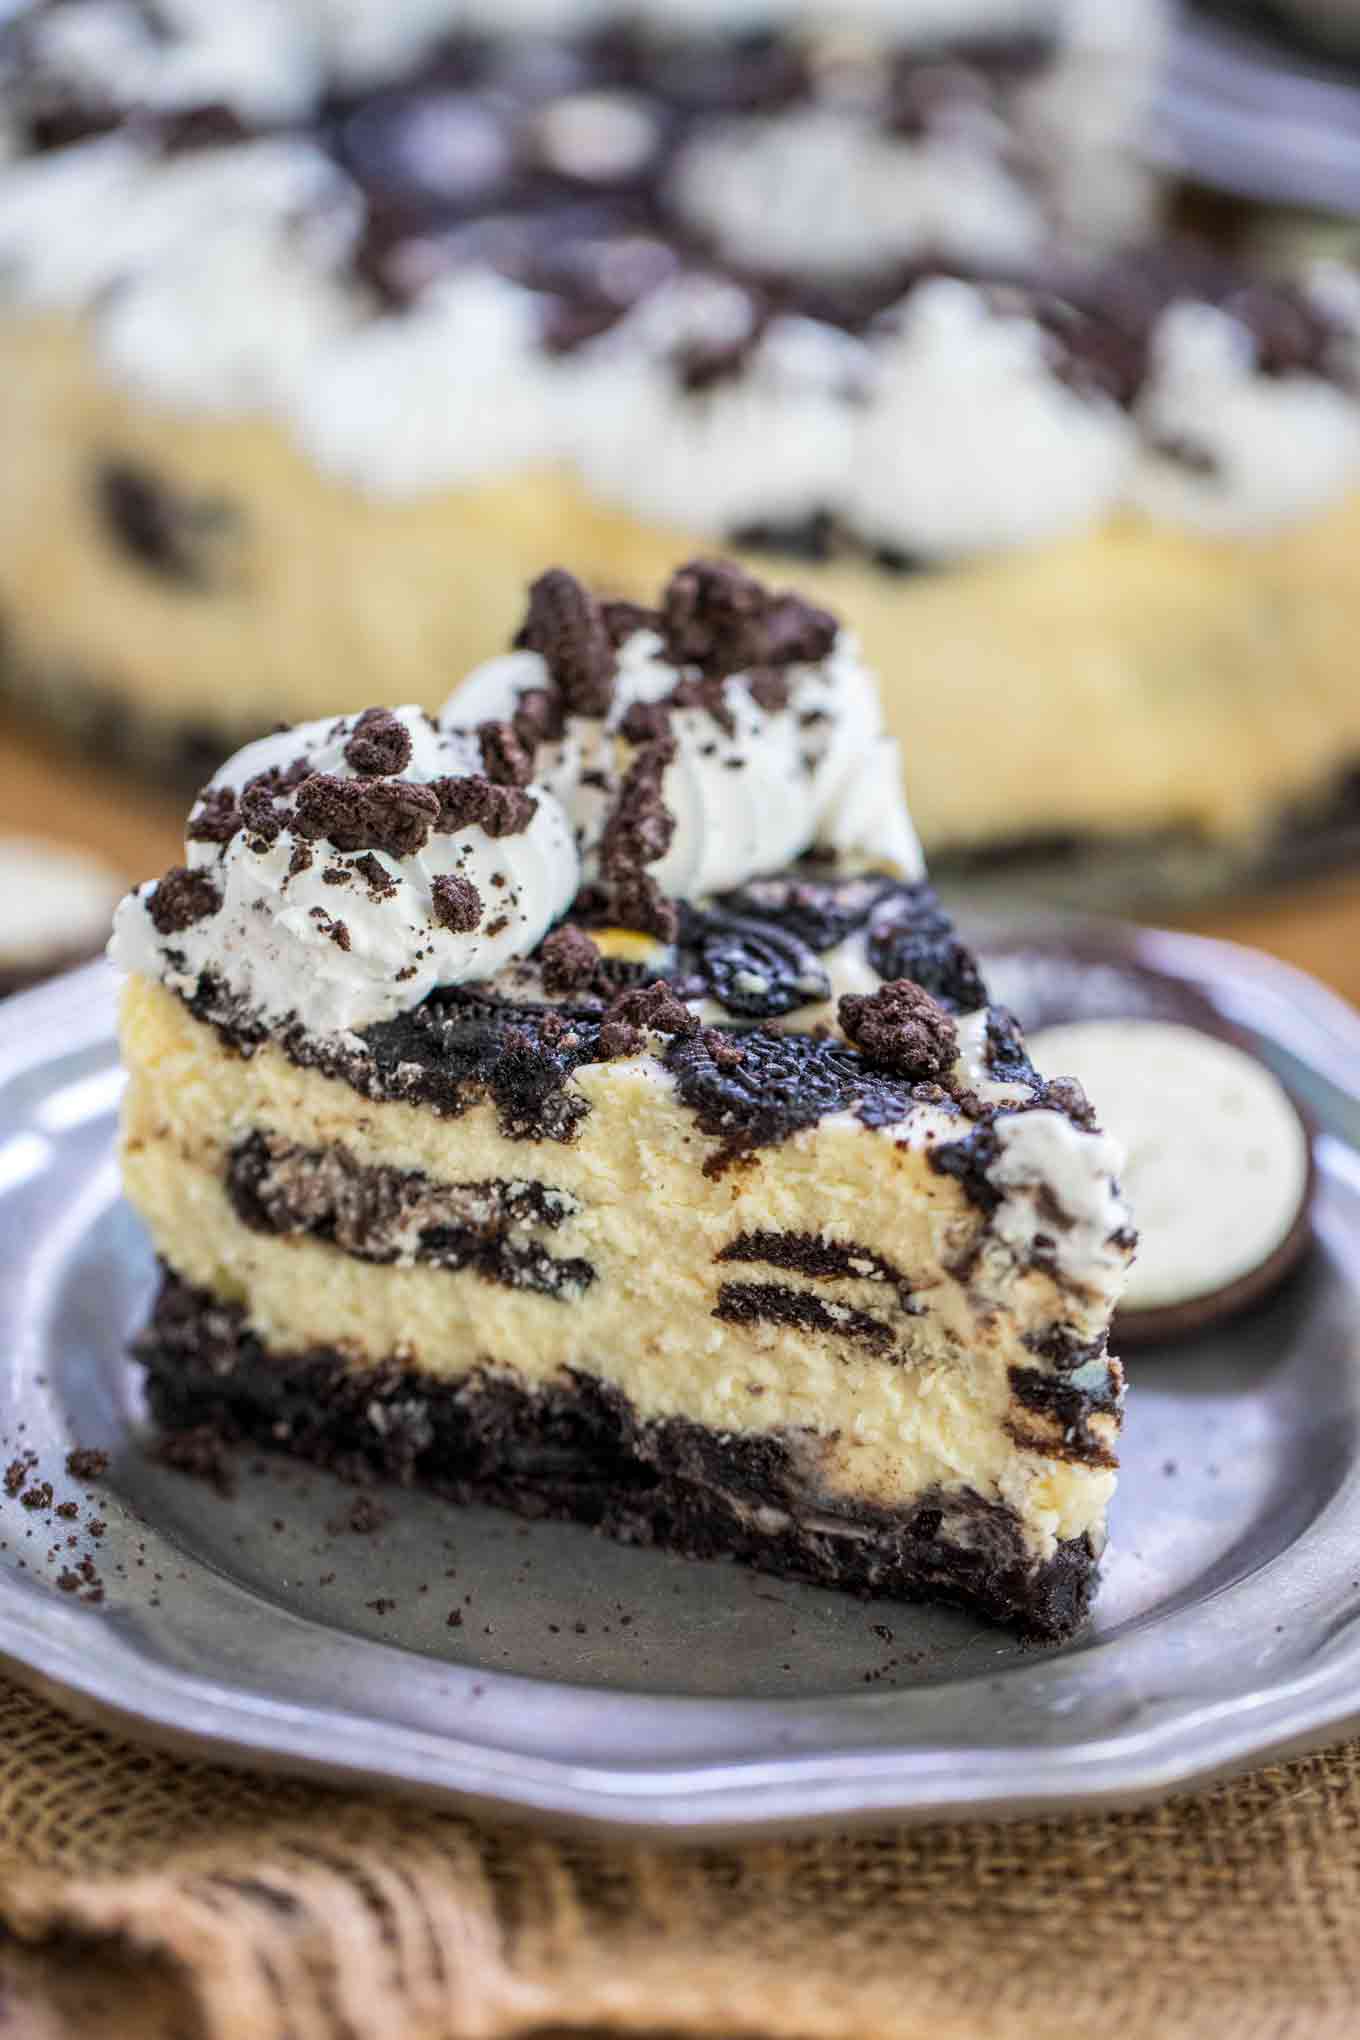 Best Oreo Cheesecake [Video] - Sweet and Savory Meals